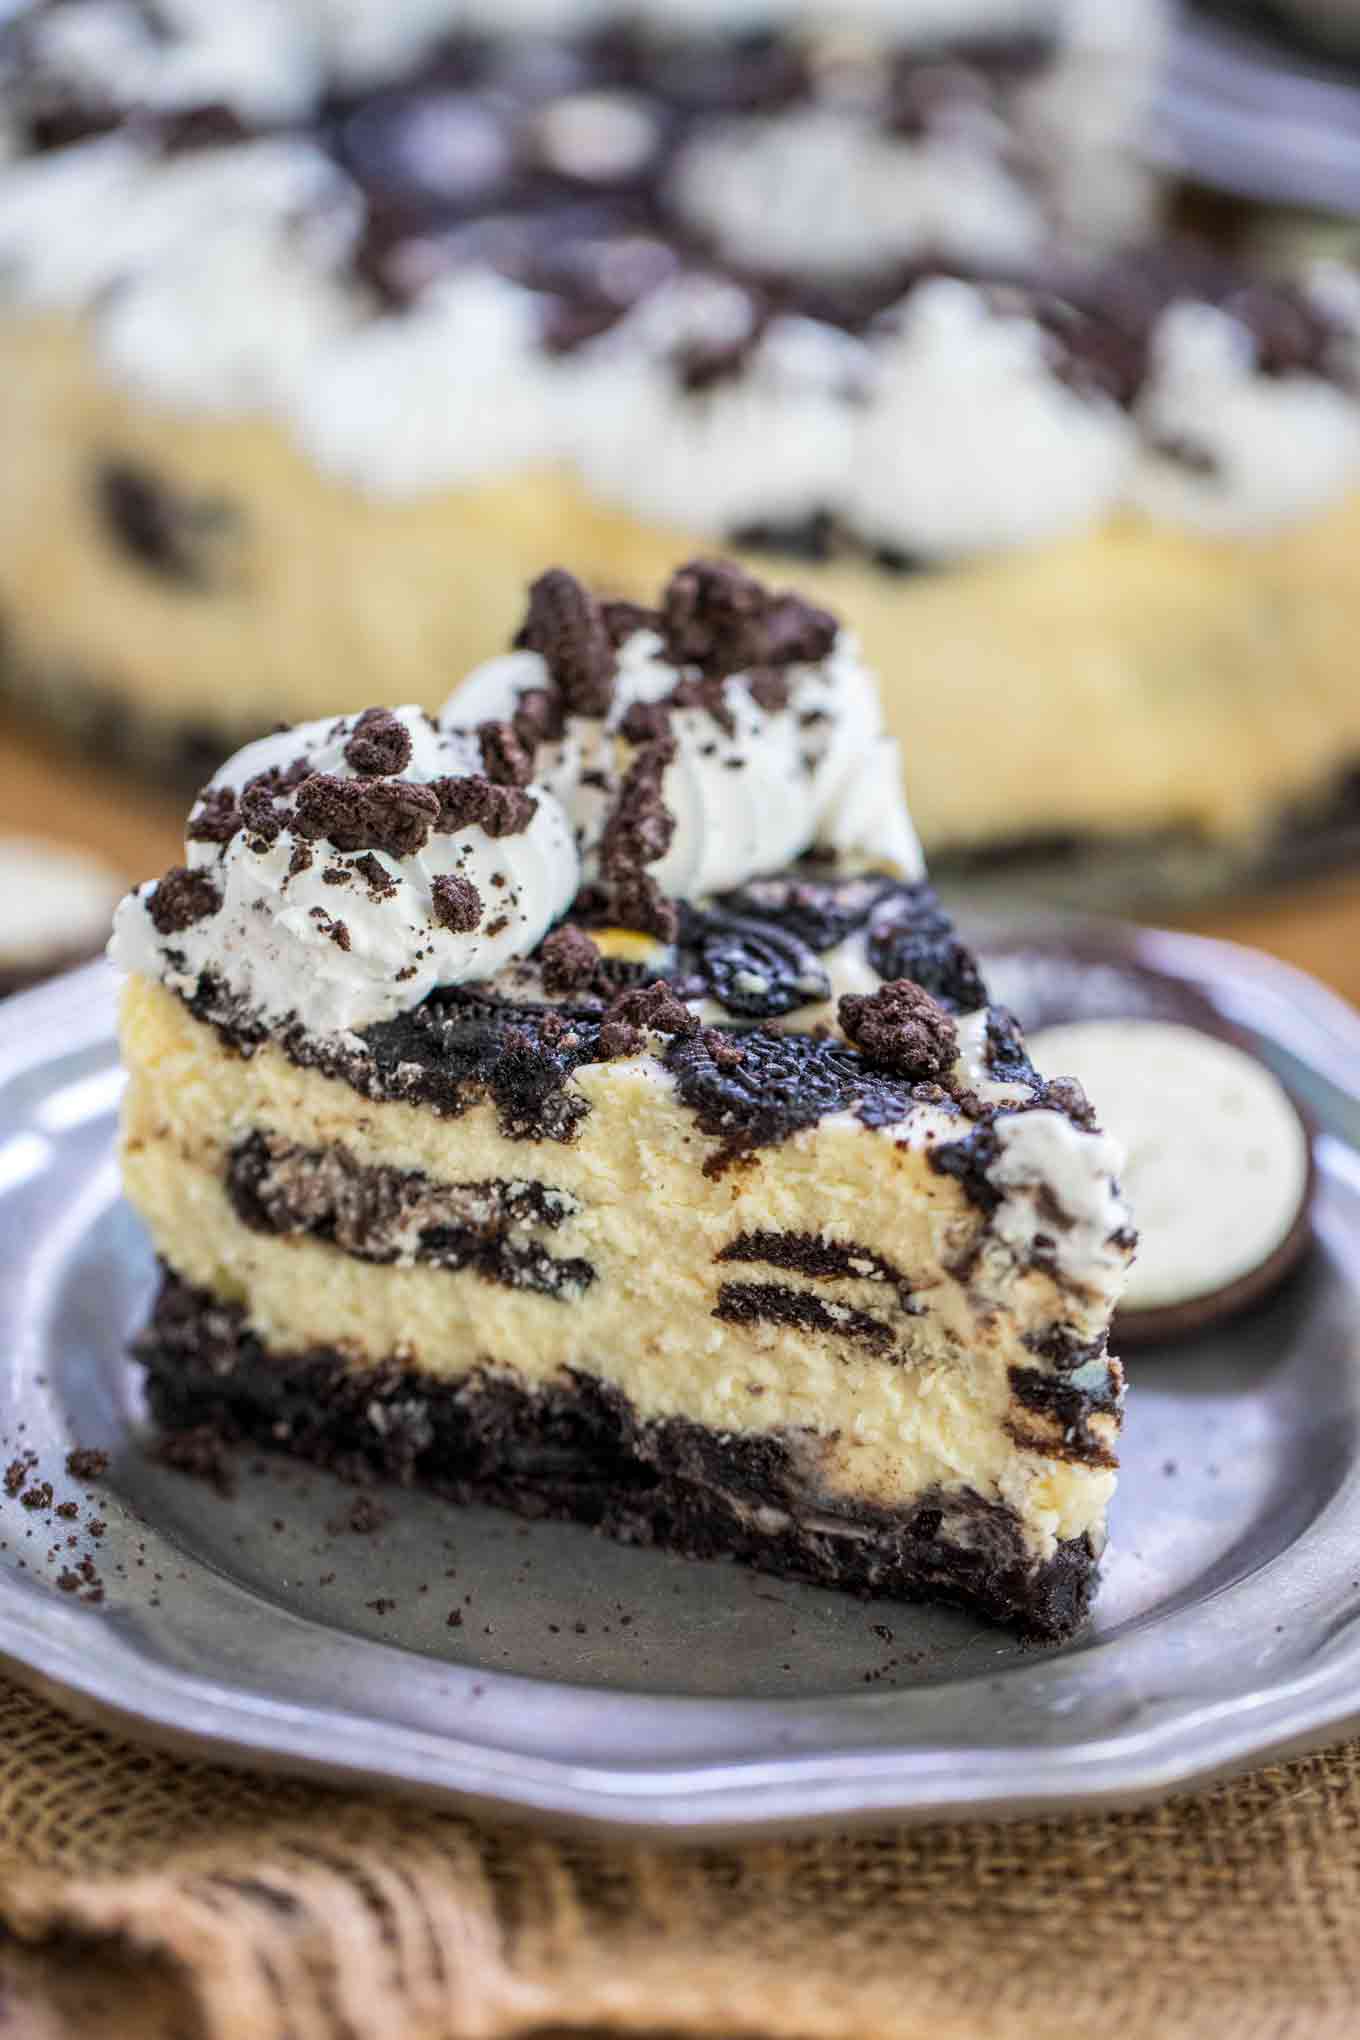 Best Oreo Cheesecake [Video] - Sweet and Savory Meals